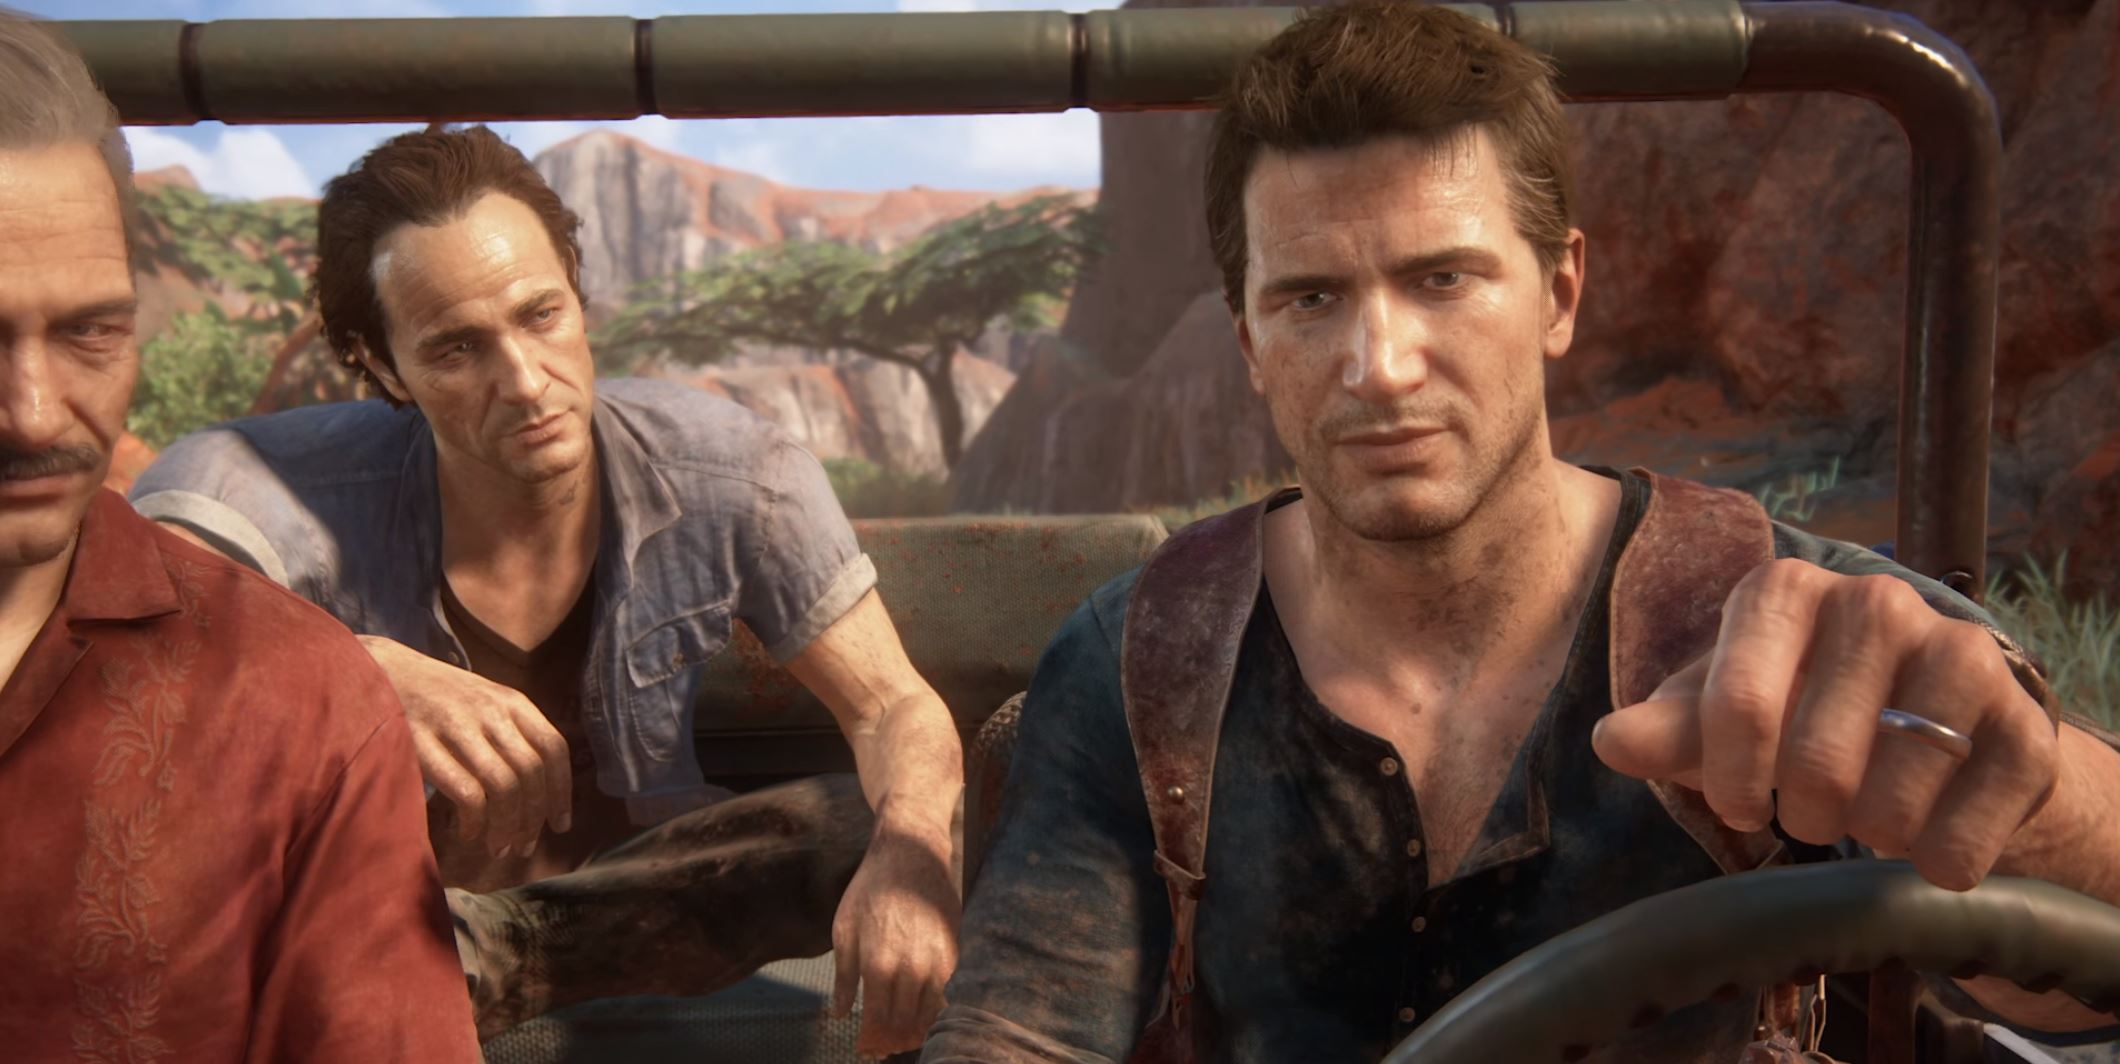 Uncharted 4: A Thief's End Gameplay Trailer Released